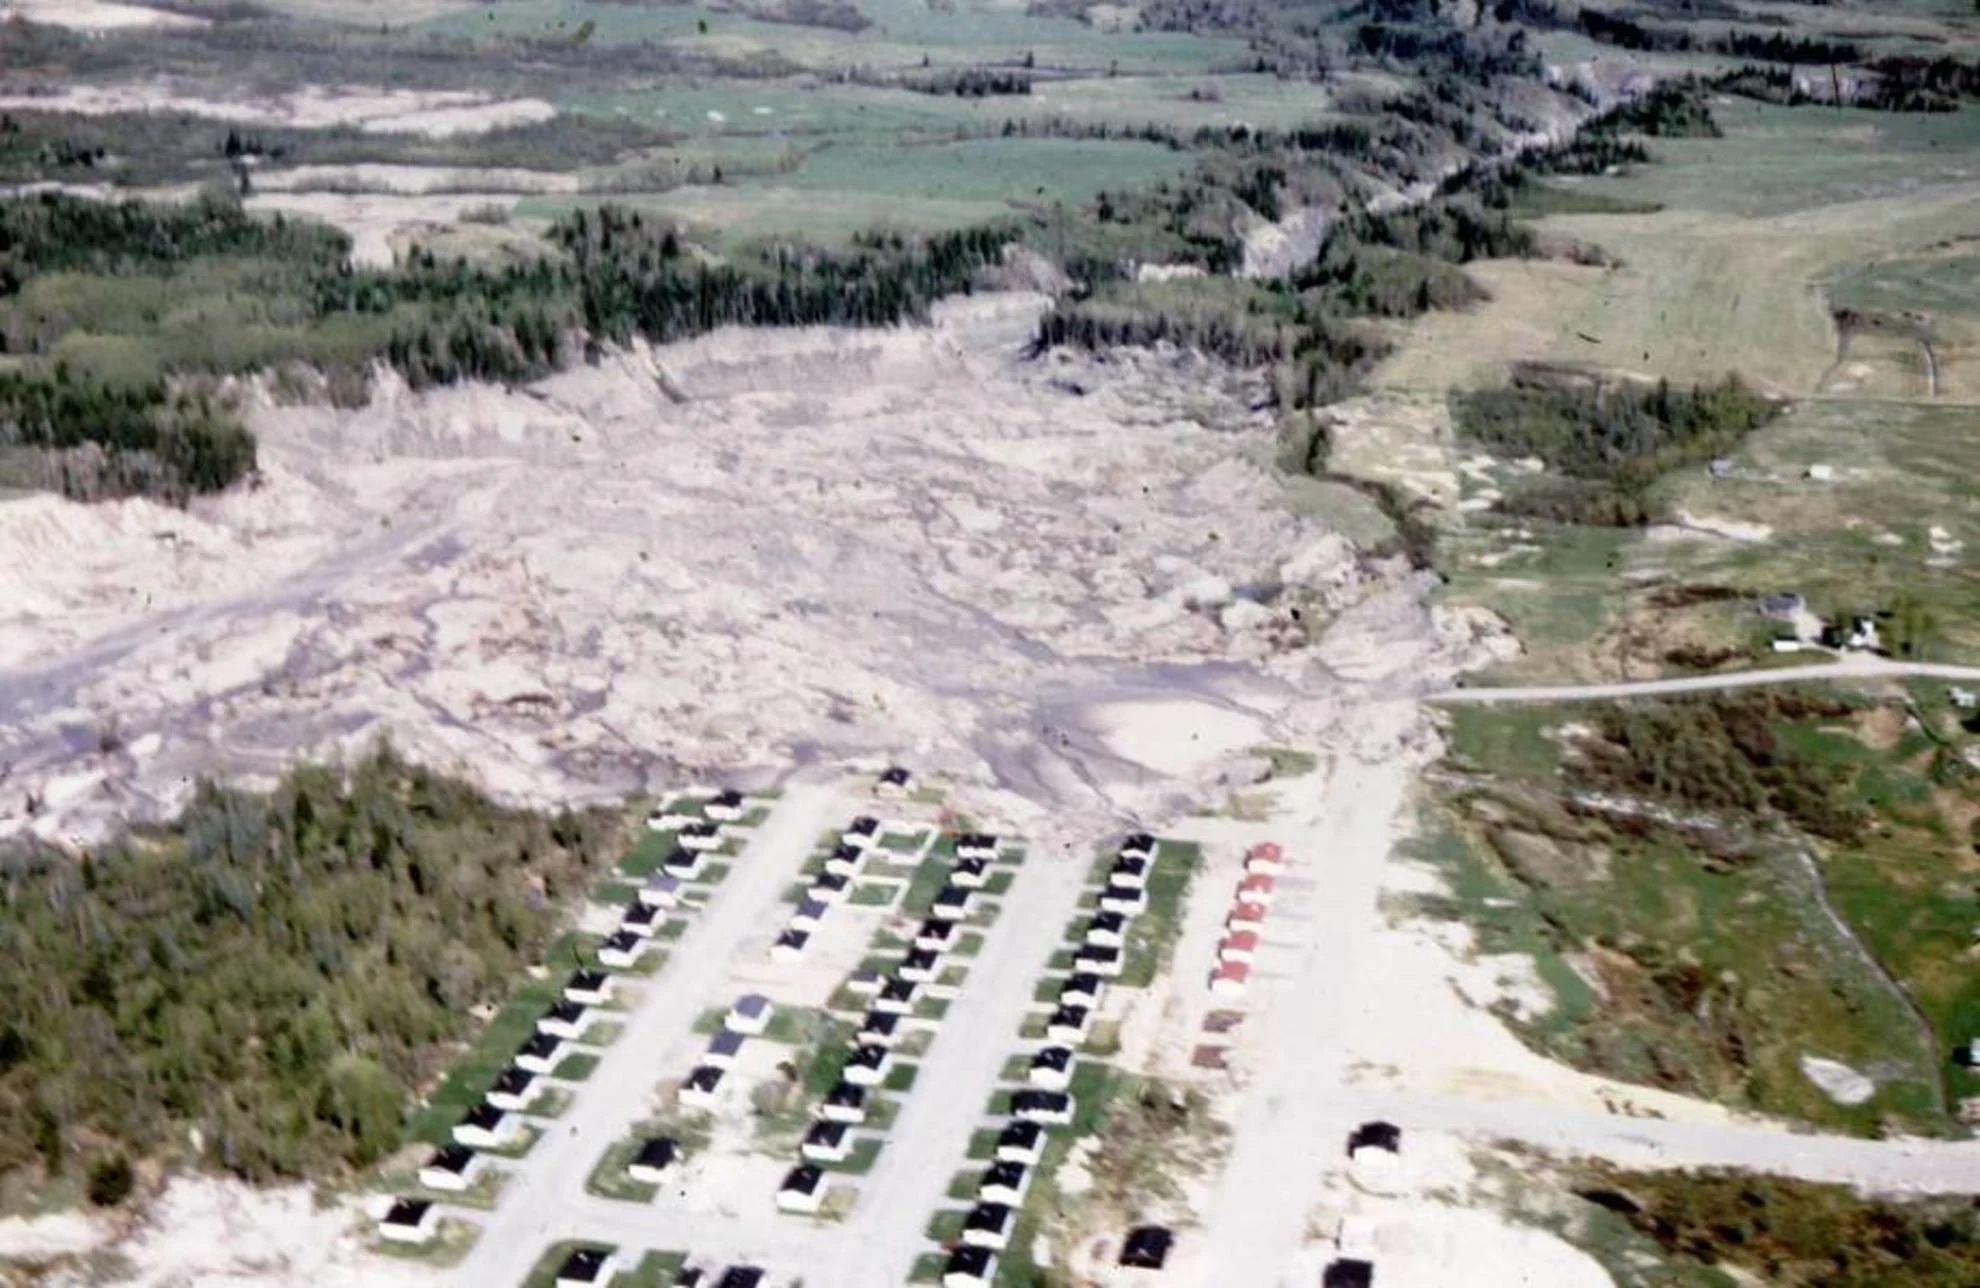 It's been half a century since a landslide engulfed a Quebec town